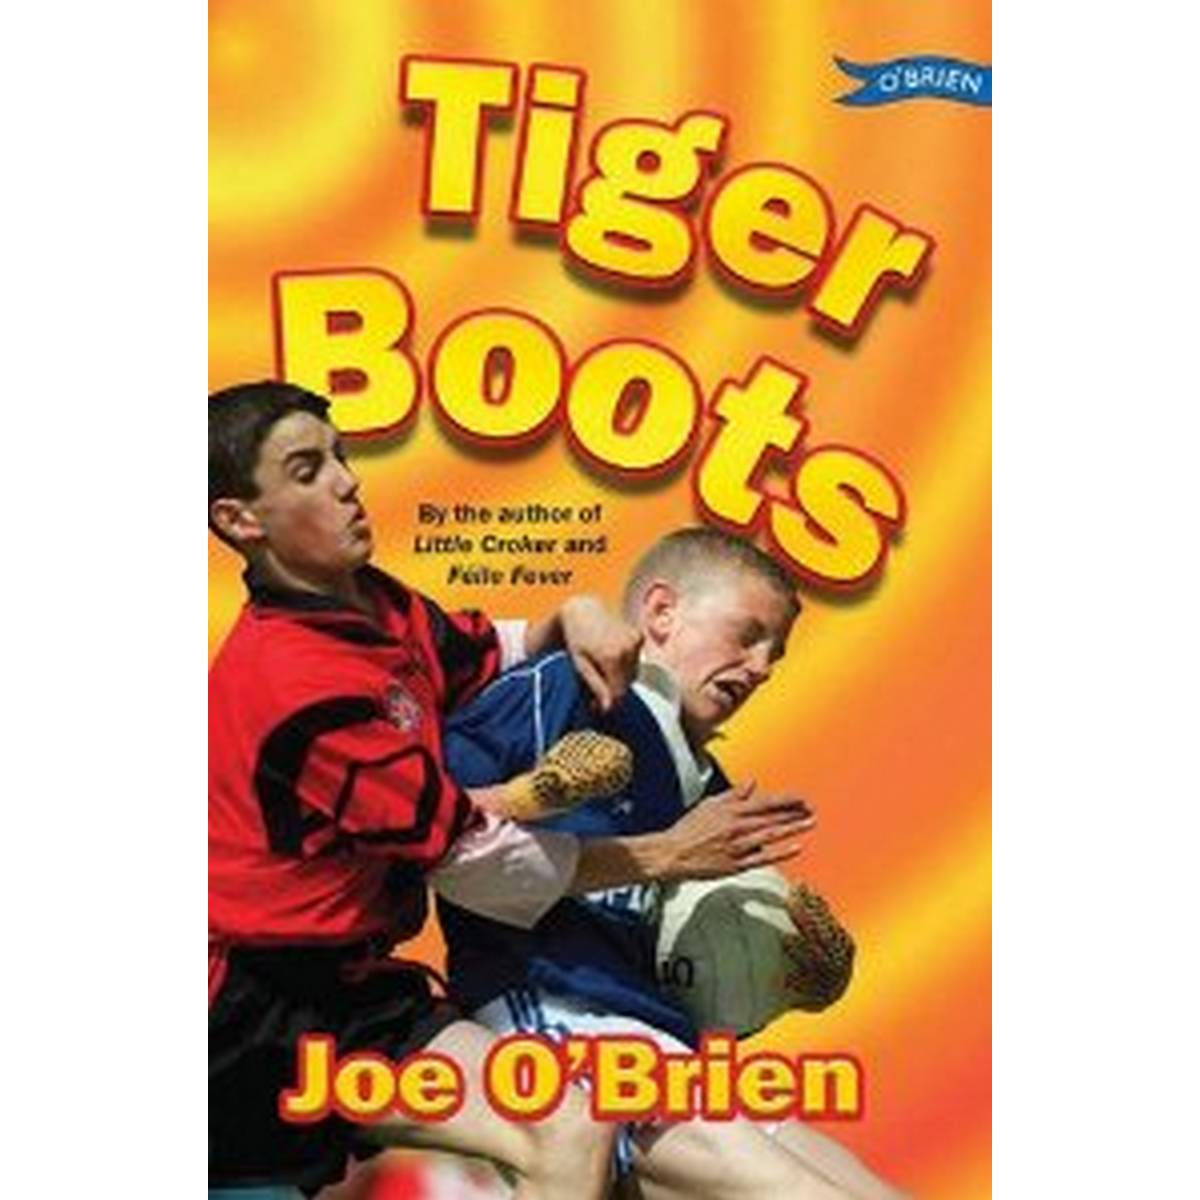 Tiger Boots (Danny Wilde)